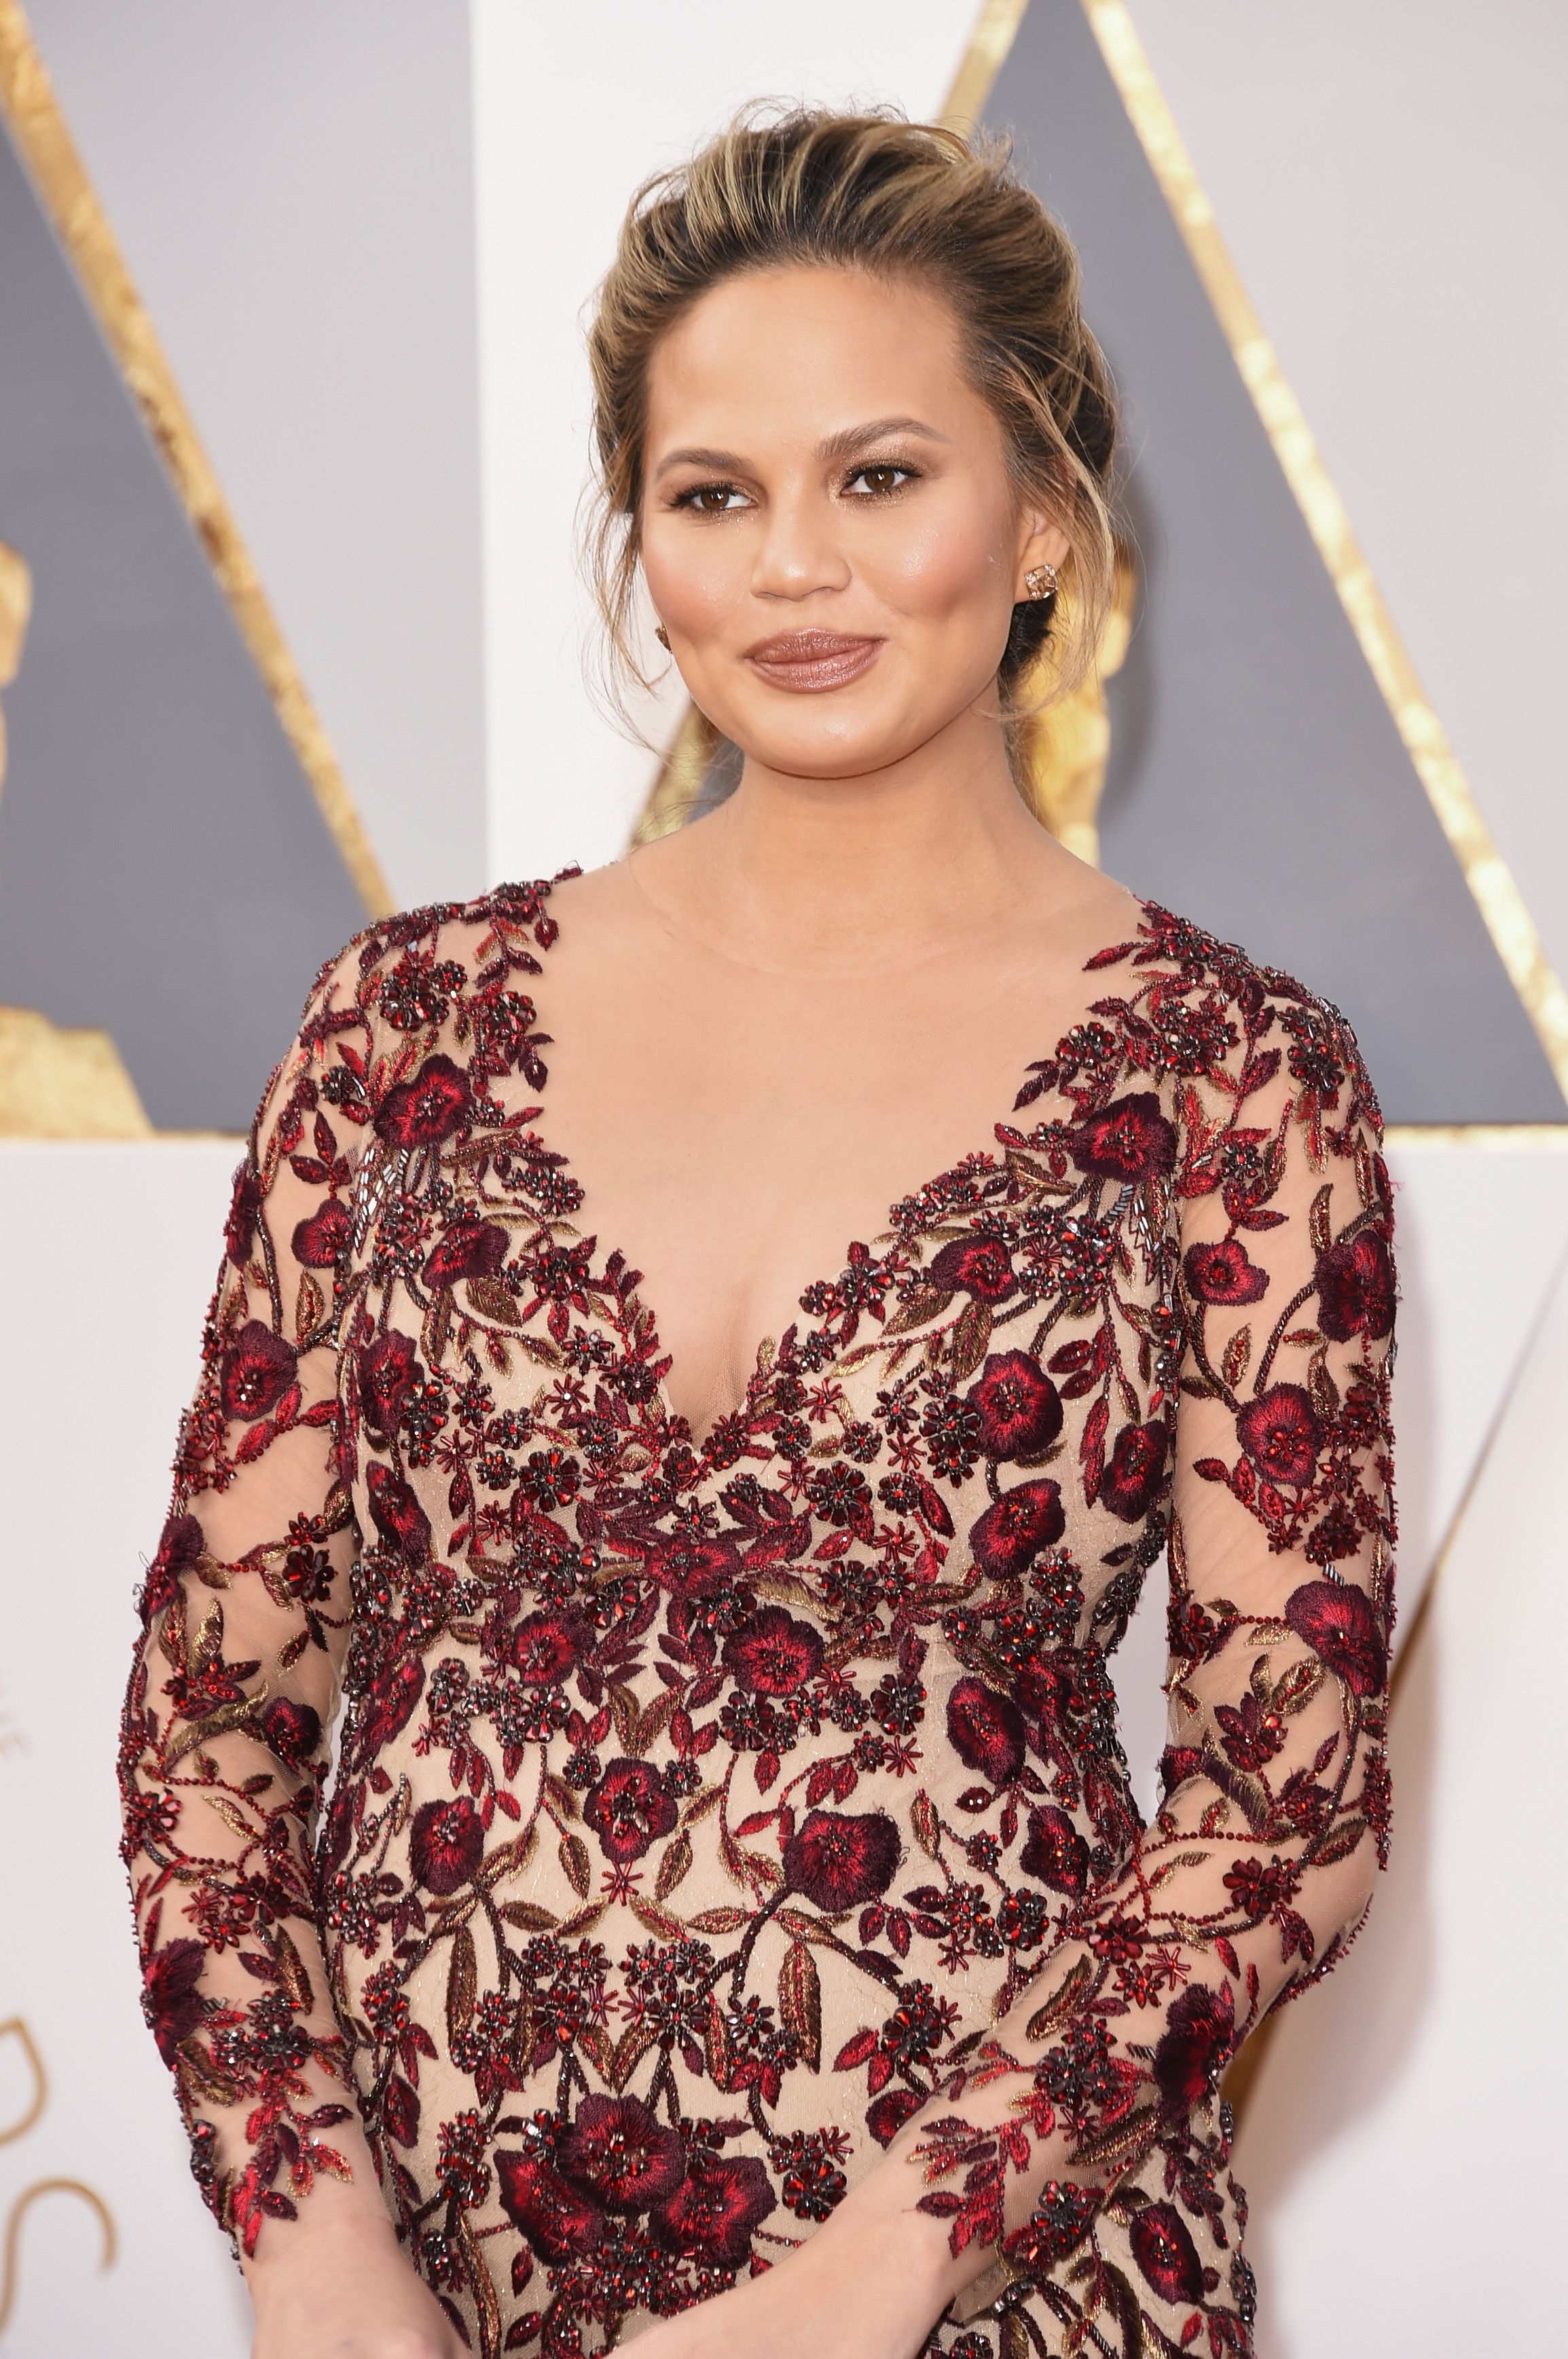 Chrissy Teigen at the 88th Annual Academy Awards at Hollywood & Highland Center on February 28, 2016 | Photo: Getty Images